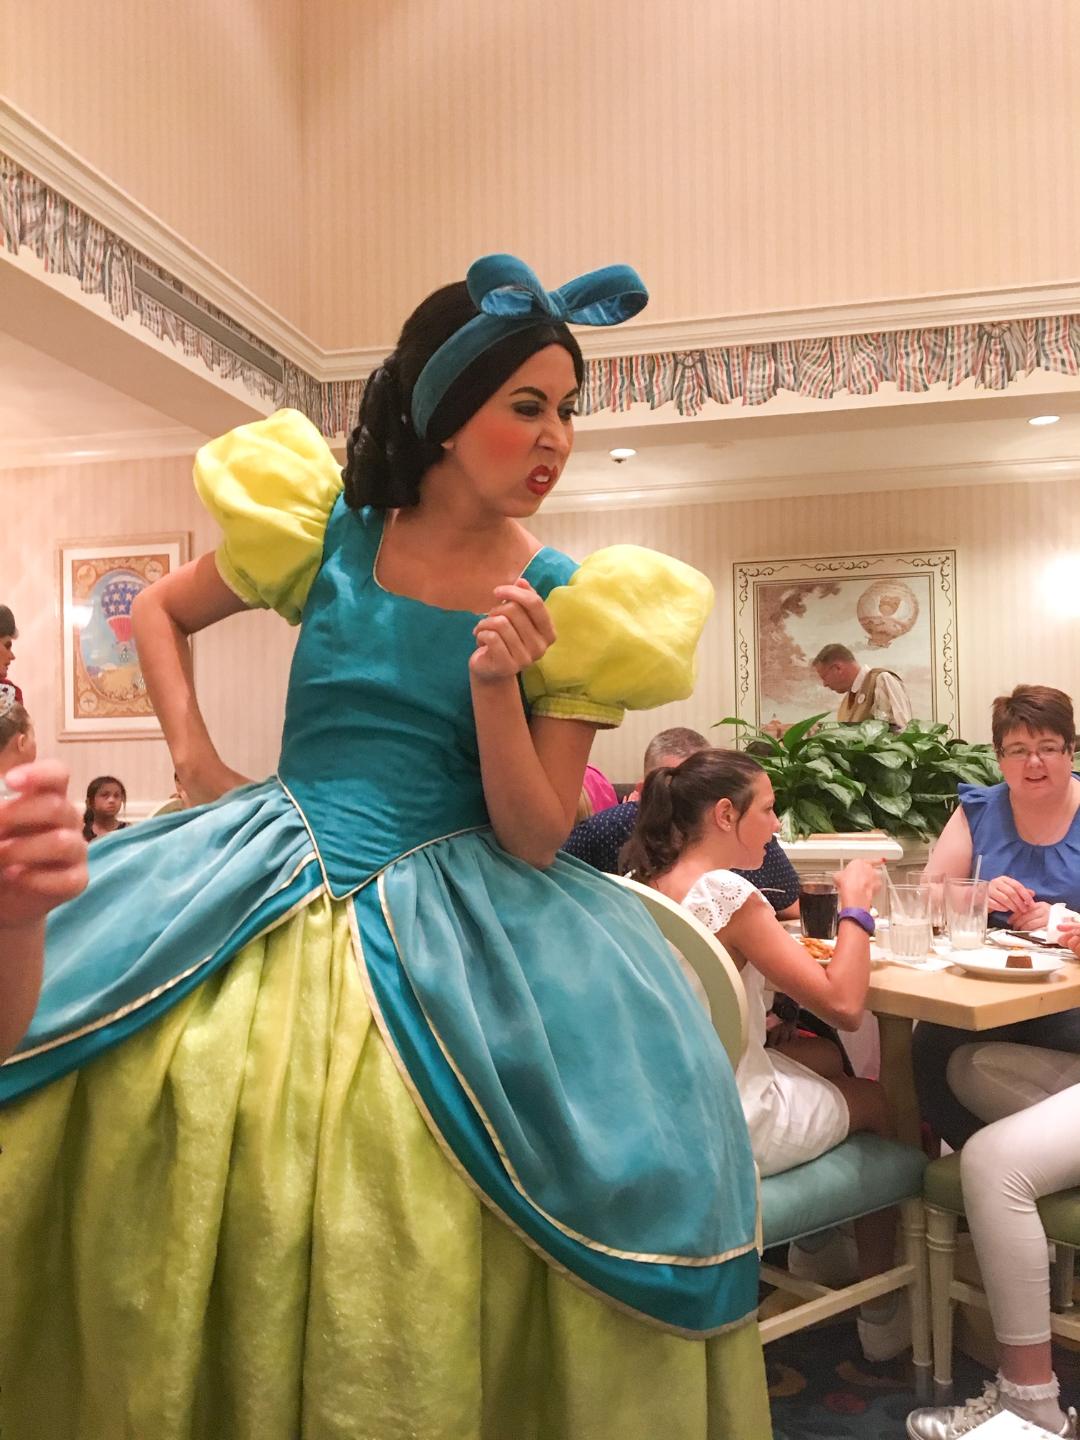 Meeting with Drizella, one of the ugly stepsister from Cinderella during a Disney Character Breakfast